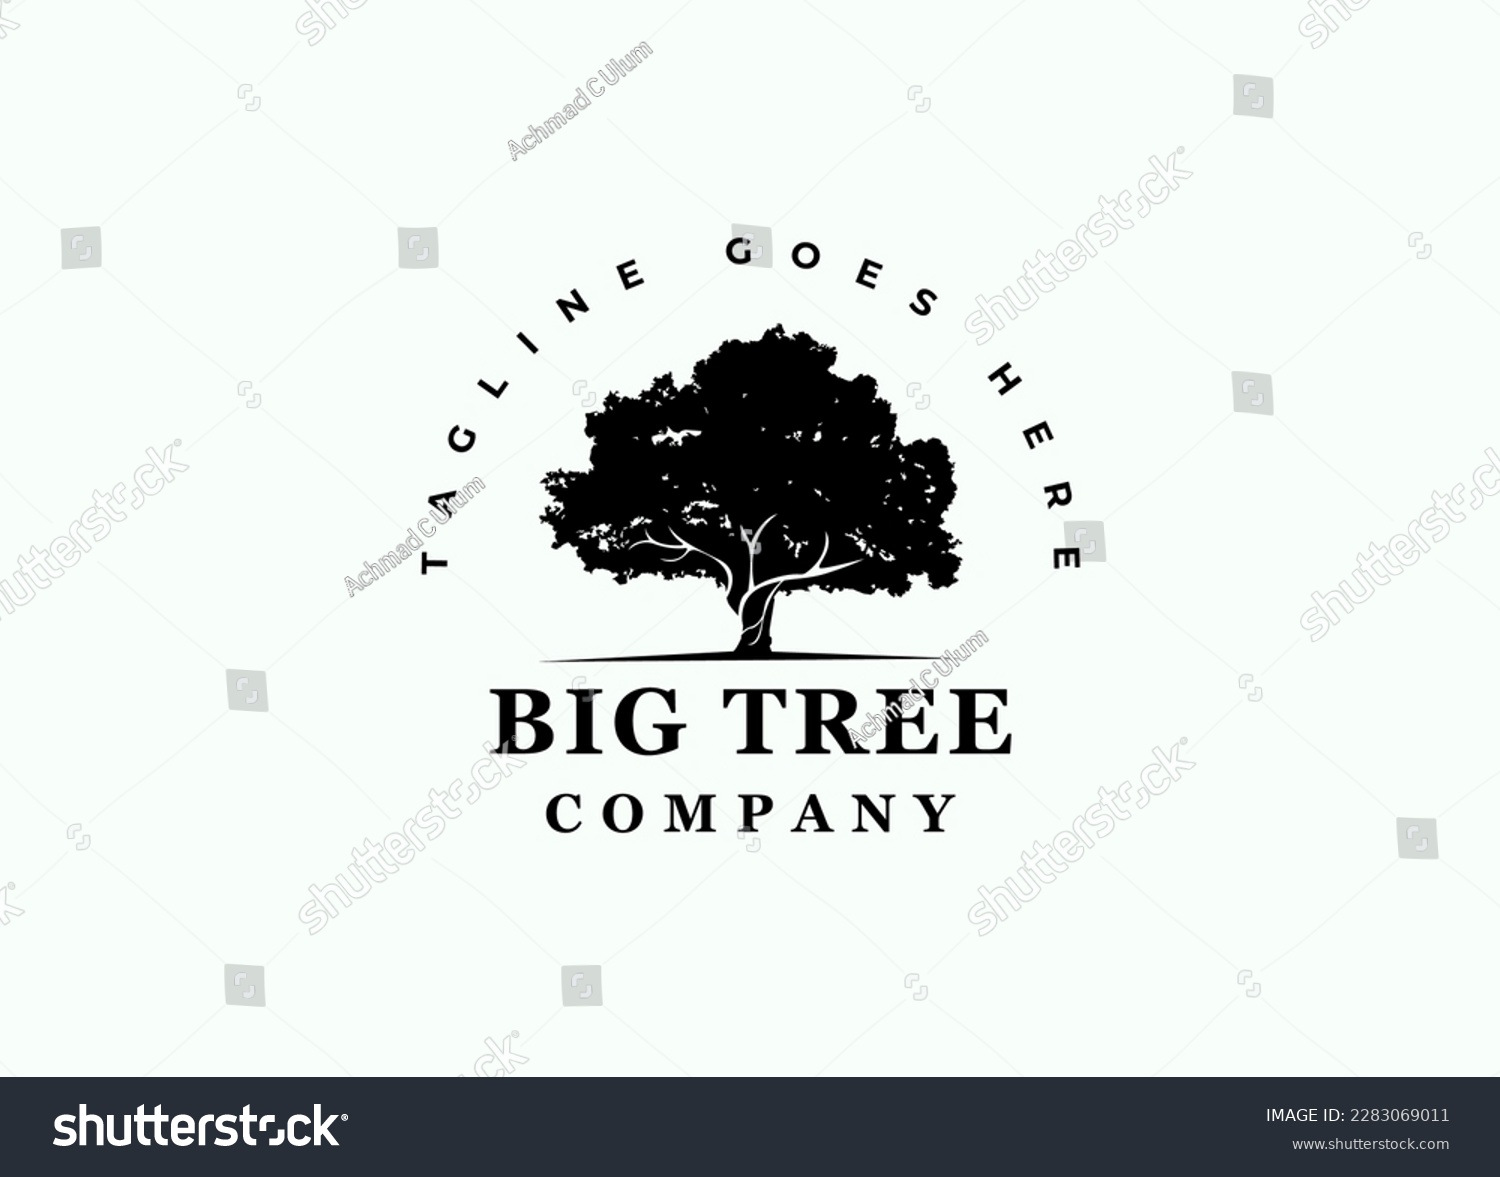 SVG of Big Oak Tree silhouette logo is a logo design that illustrates a large oak tree logos with vintage style for logo conservation, residential services, etc. svg